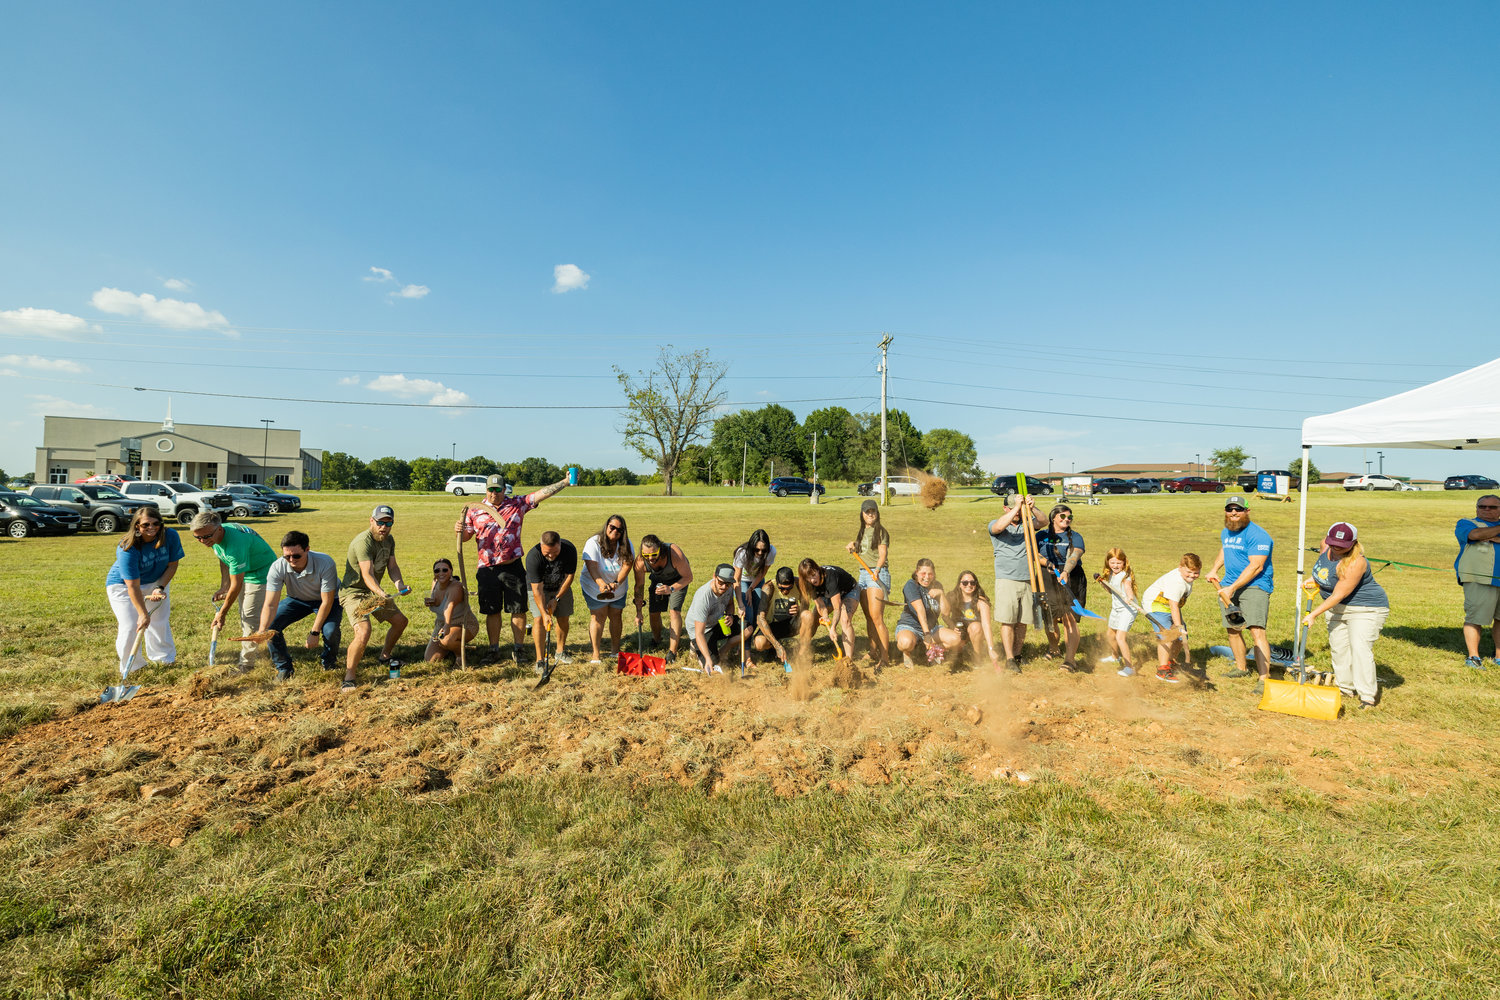 Stakeholders break ground Aug. 26 on the 12,000-square-foot project.